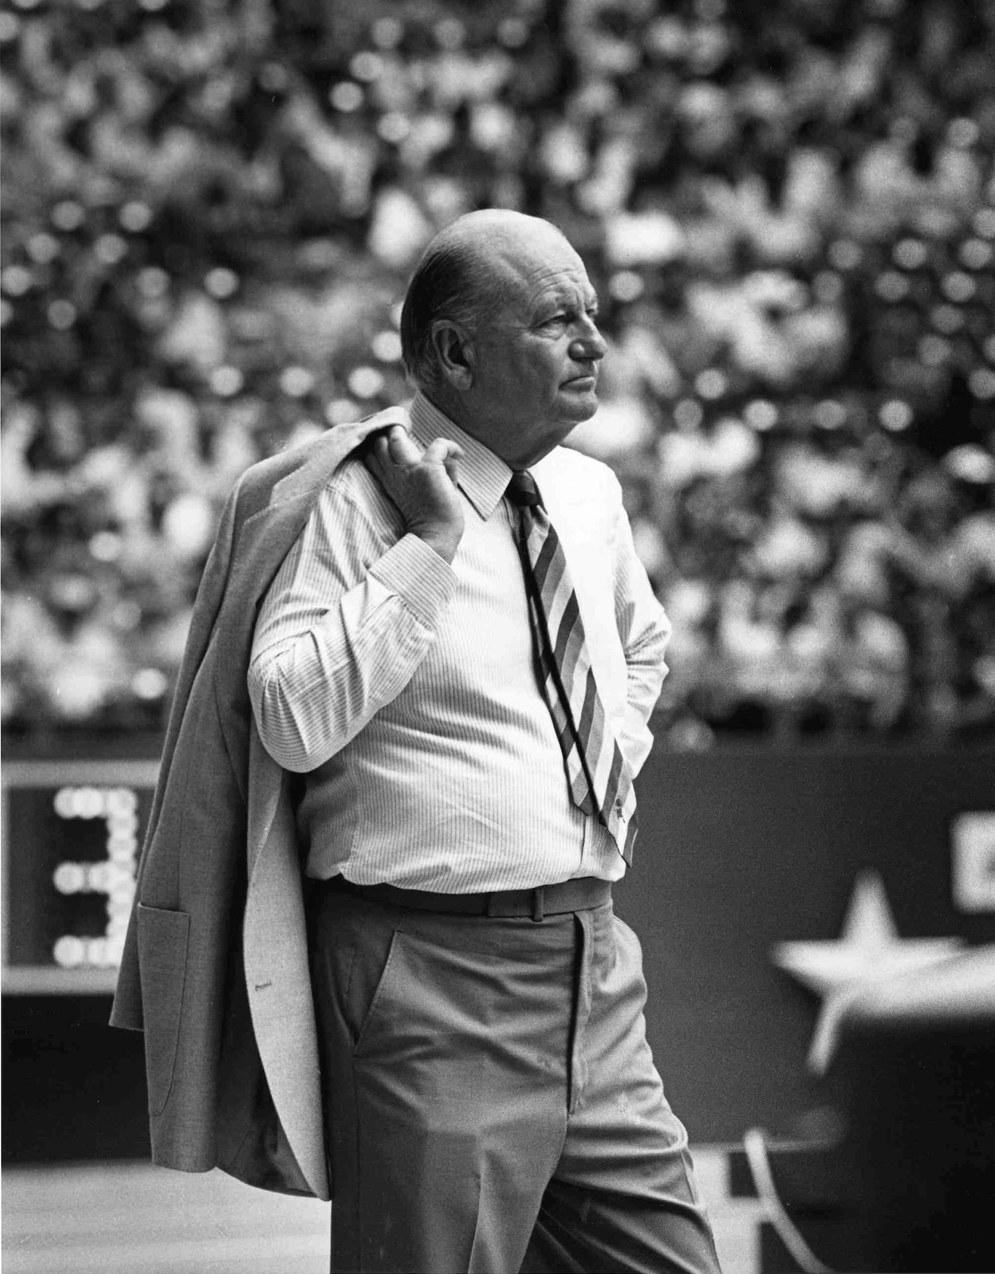 &#xA;Dallas Cowboys President Tex Schramm on the sidelines during a 27-13 win over the Pittsburgh Steelers on October 13, 1985 at Texas Stadium in Dallas, Texas. (AP Photo/NFL Photos)&#xA;